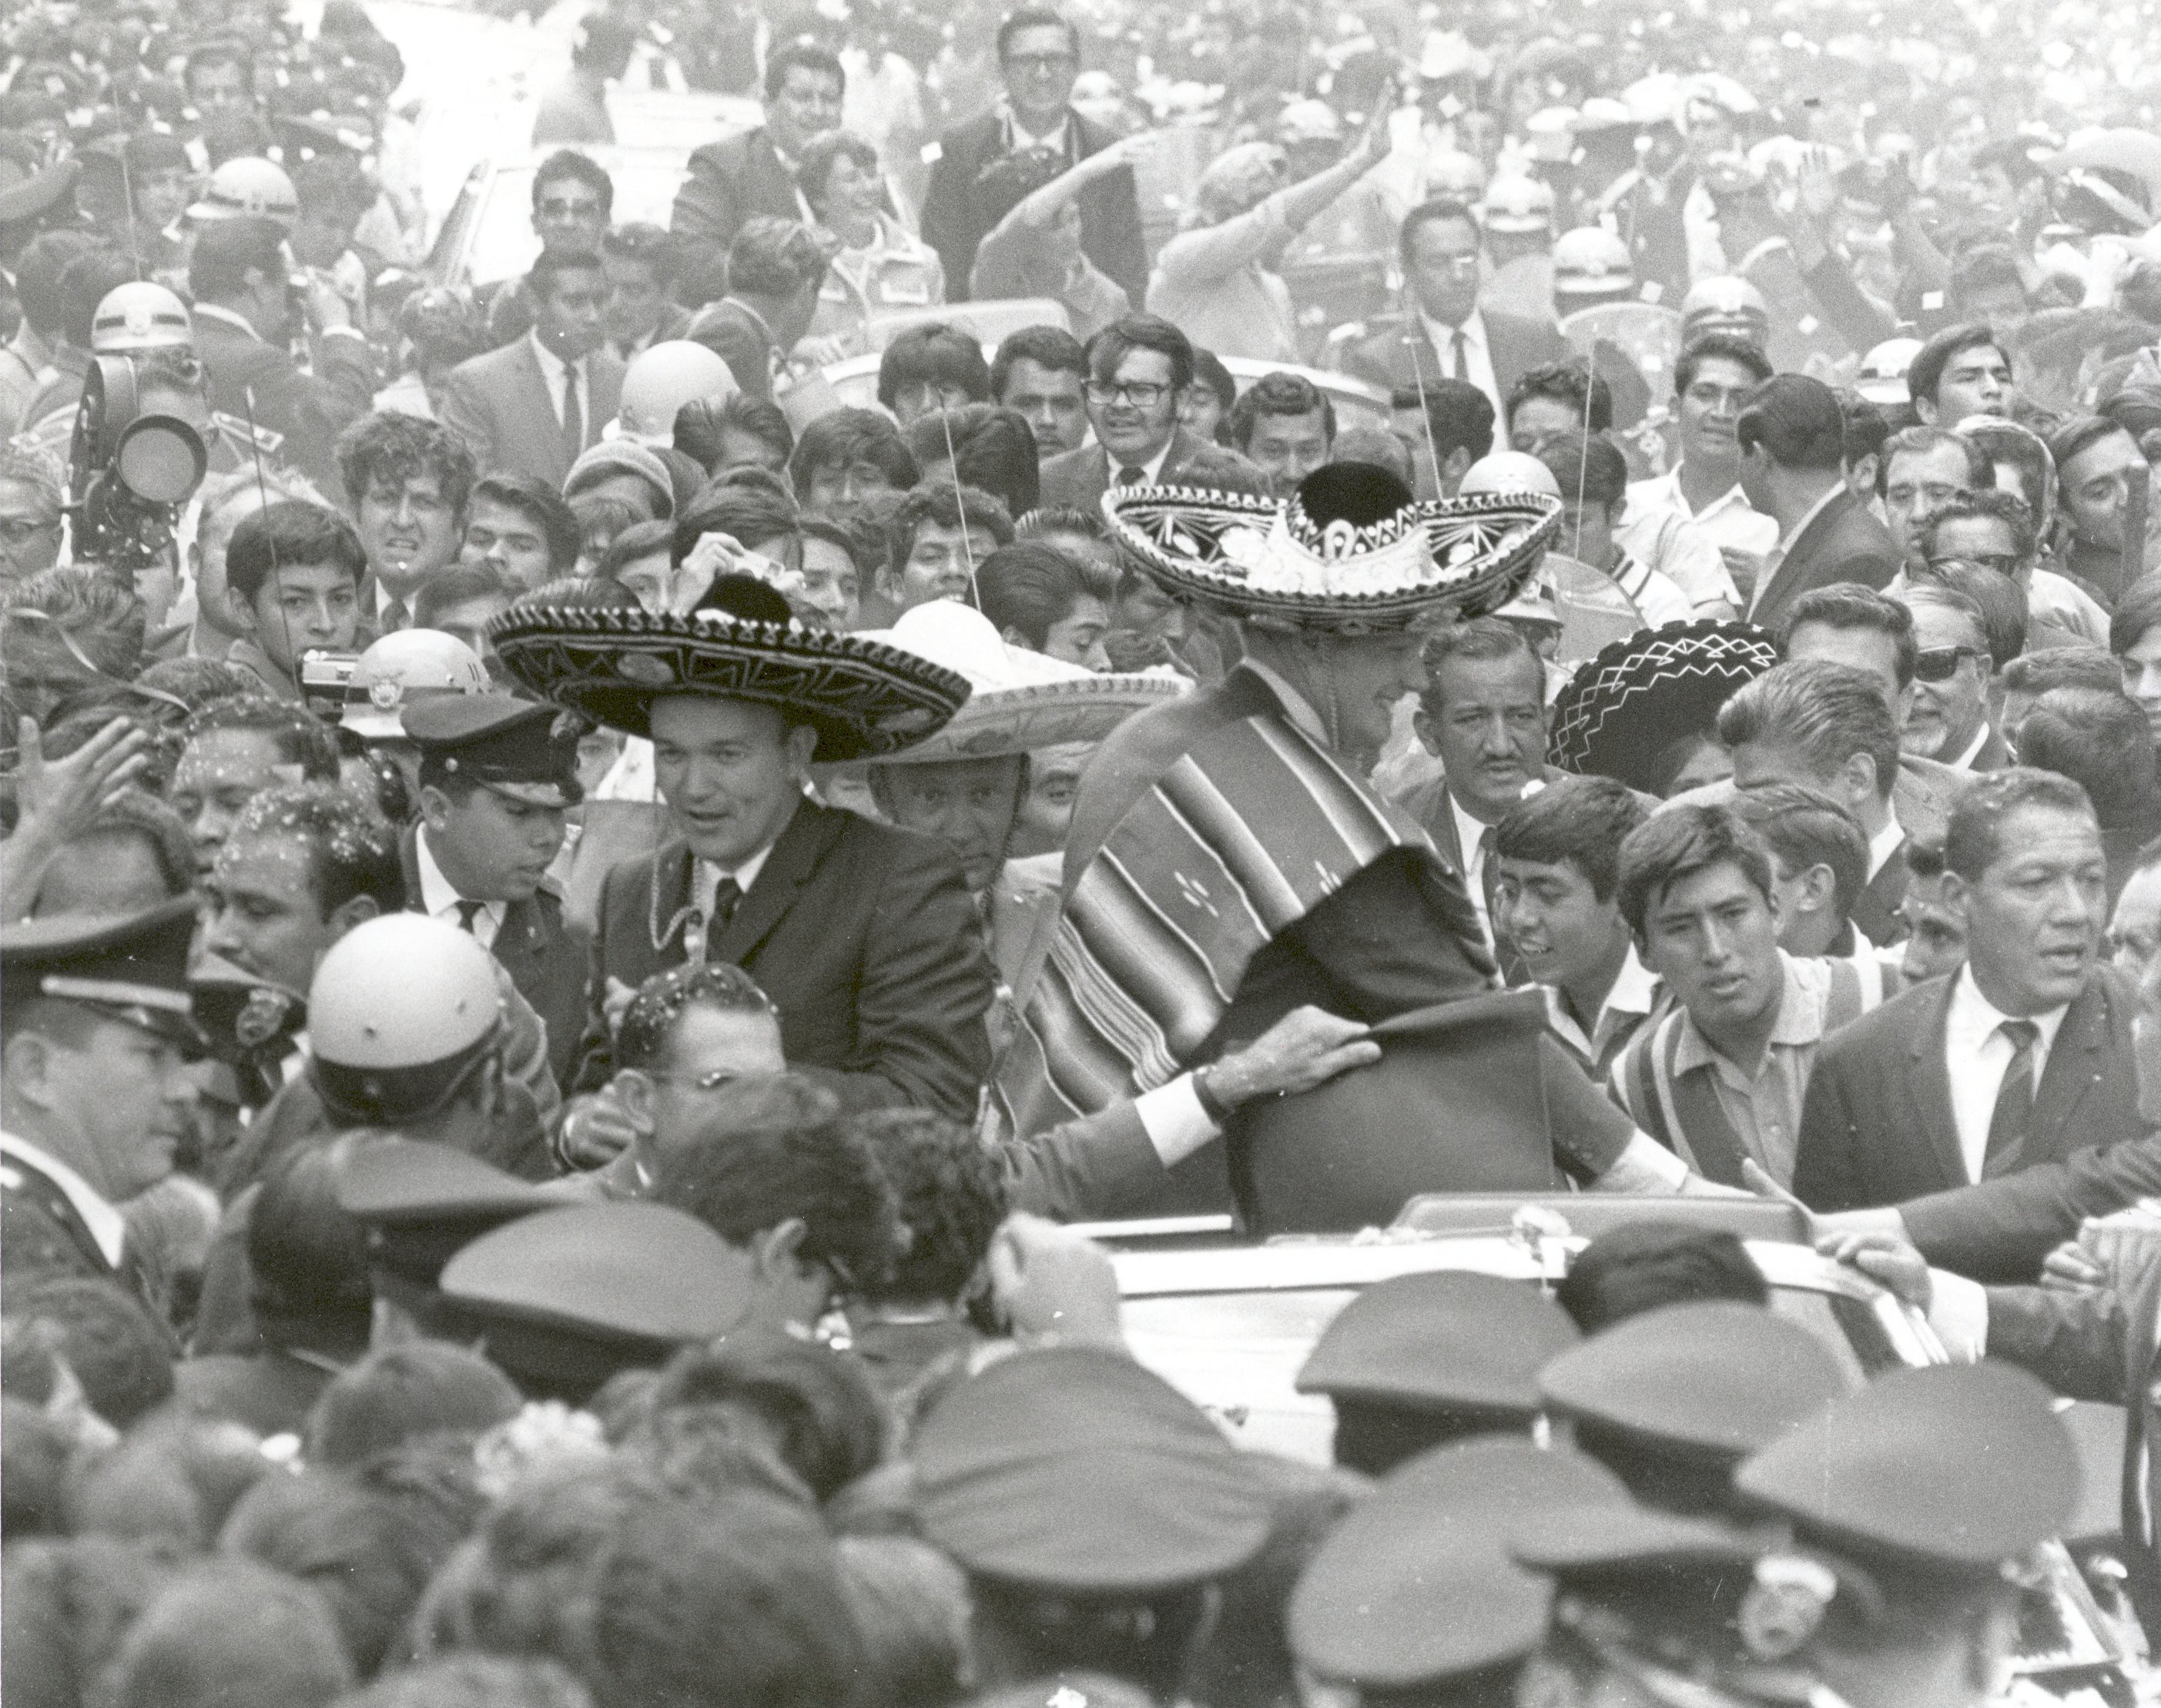 Cheering crowds meet the Apollo 13 astronauts in Mexico City on Sept. 23, 1969.